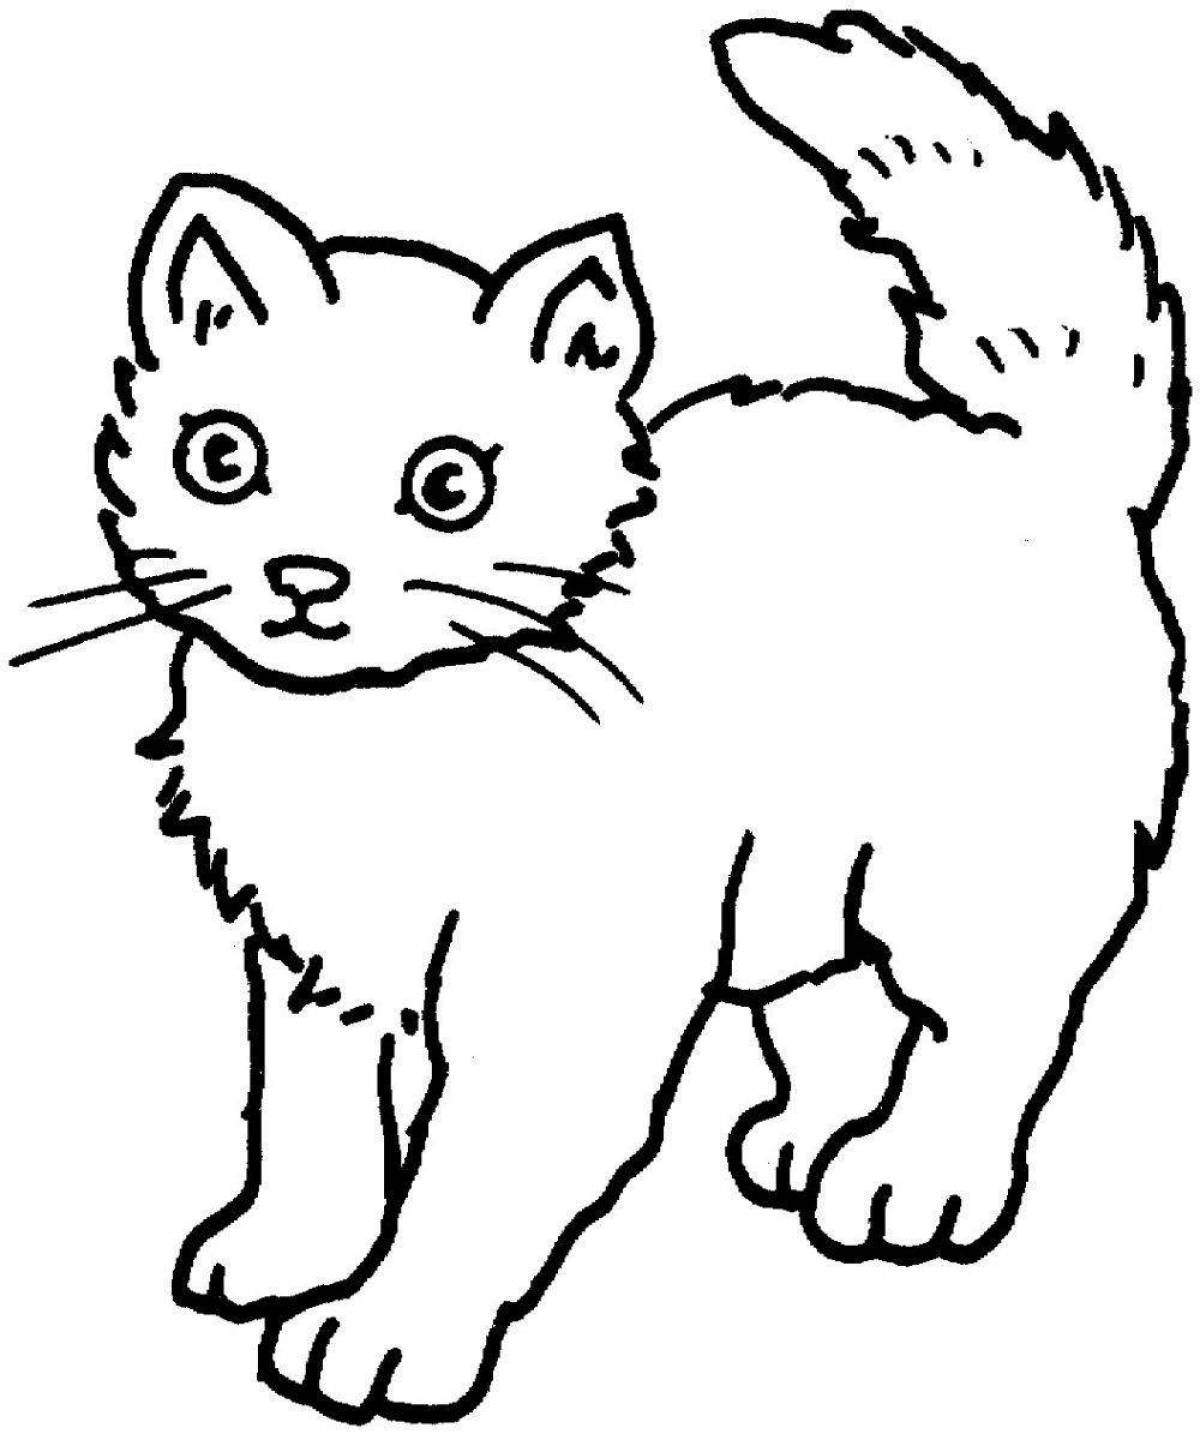 Curious coloring cat for children 4-5 years old